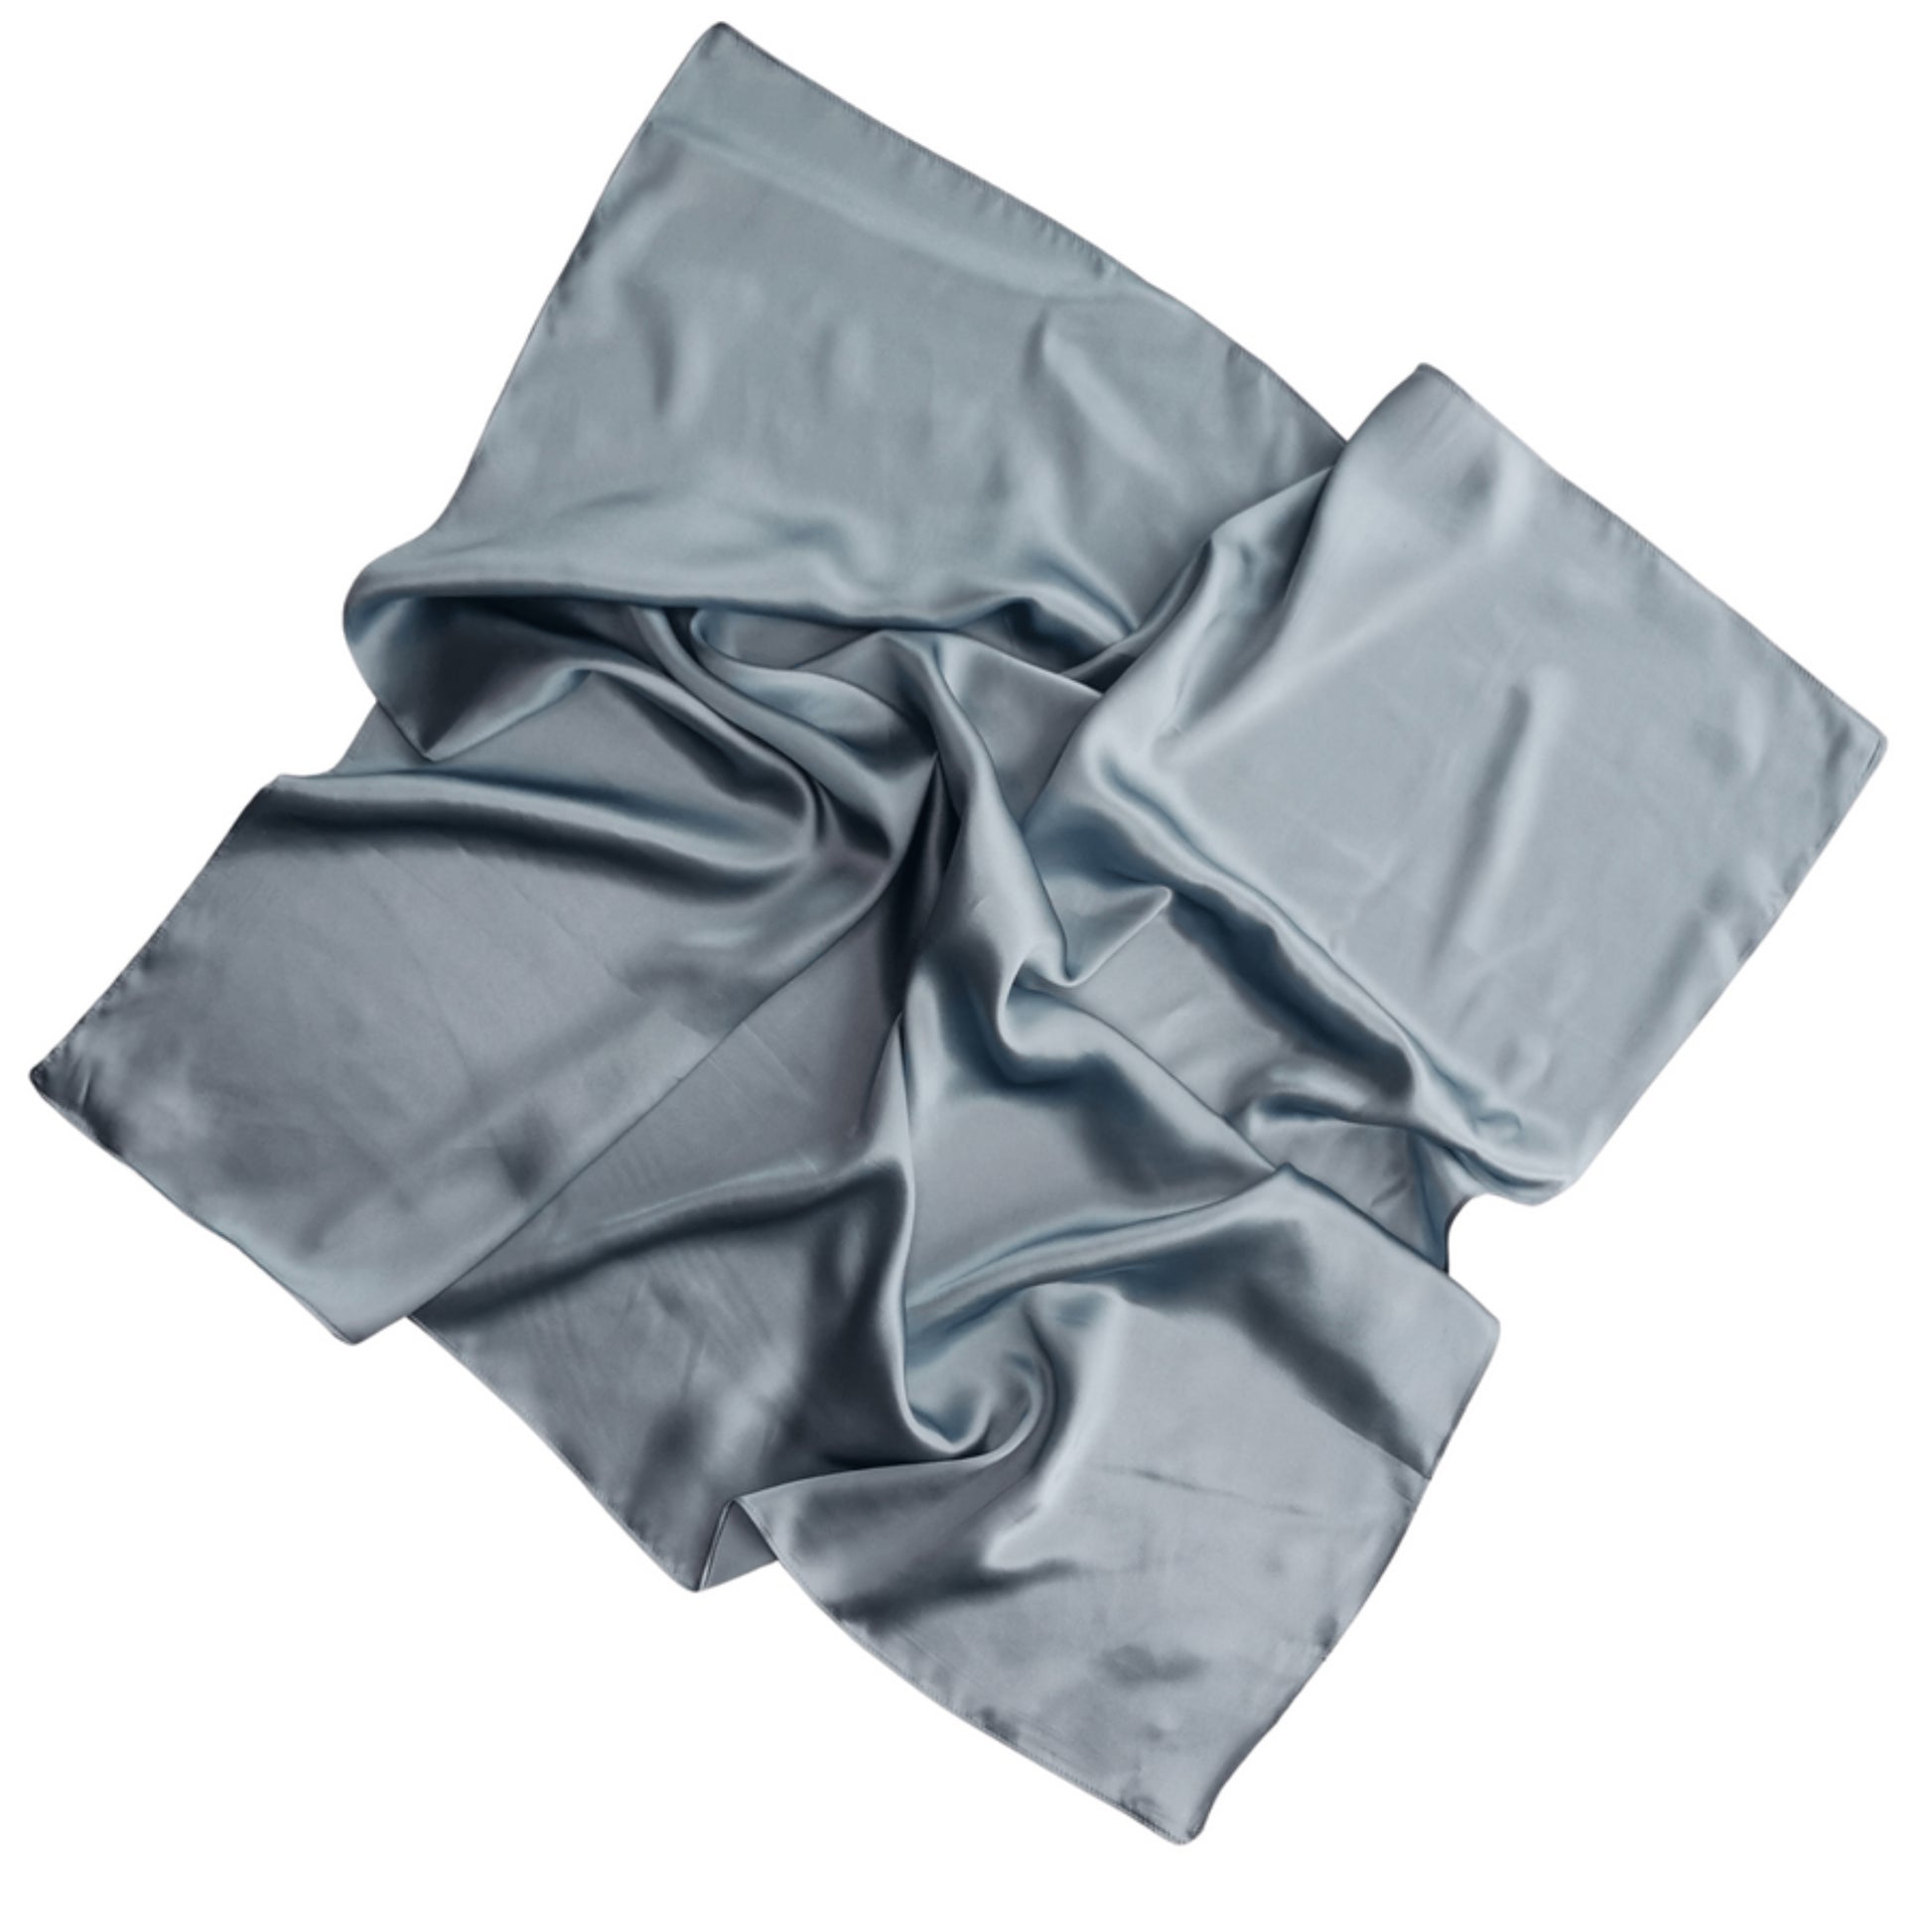 SLEEP WELL Natalie Anderson pure Mulberry silk satin square scarf - blue grey scarf flat lay